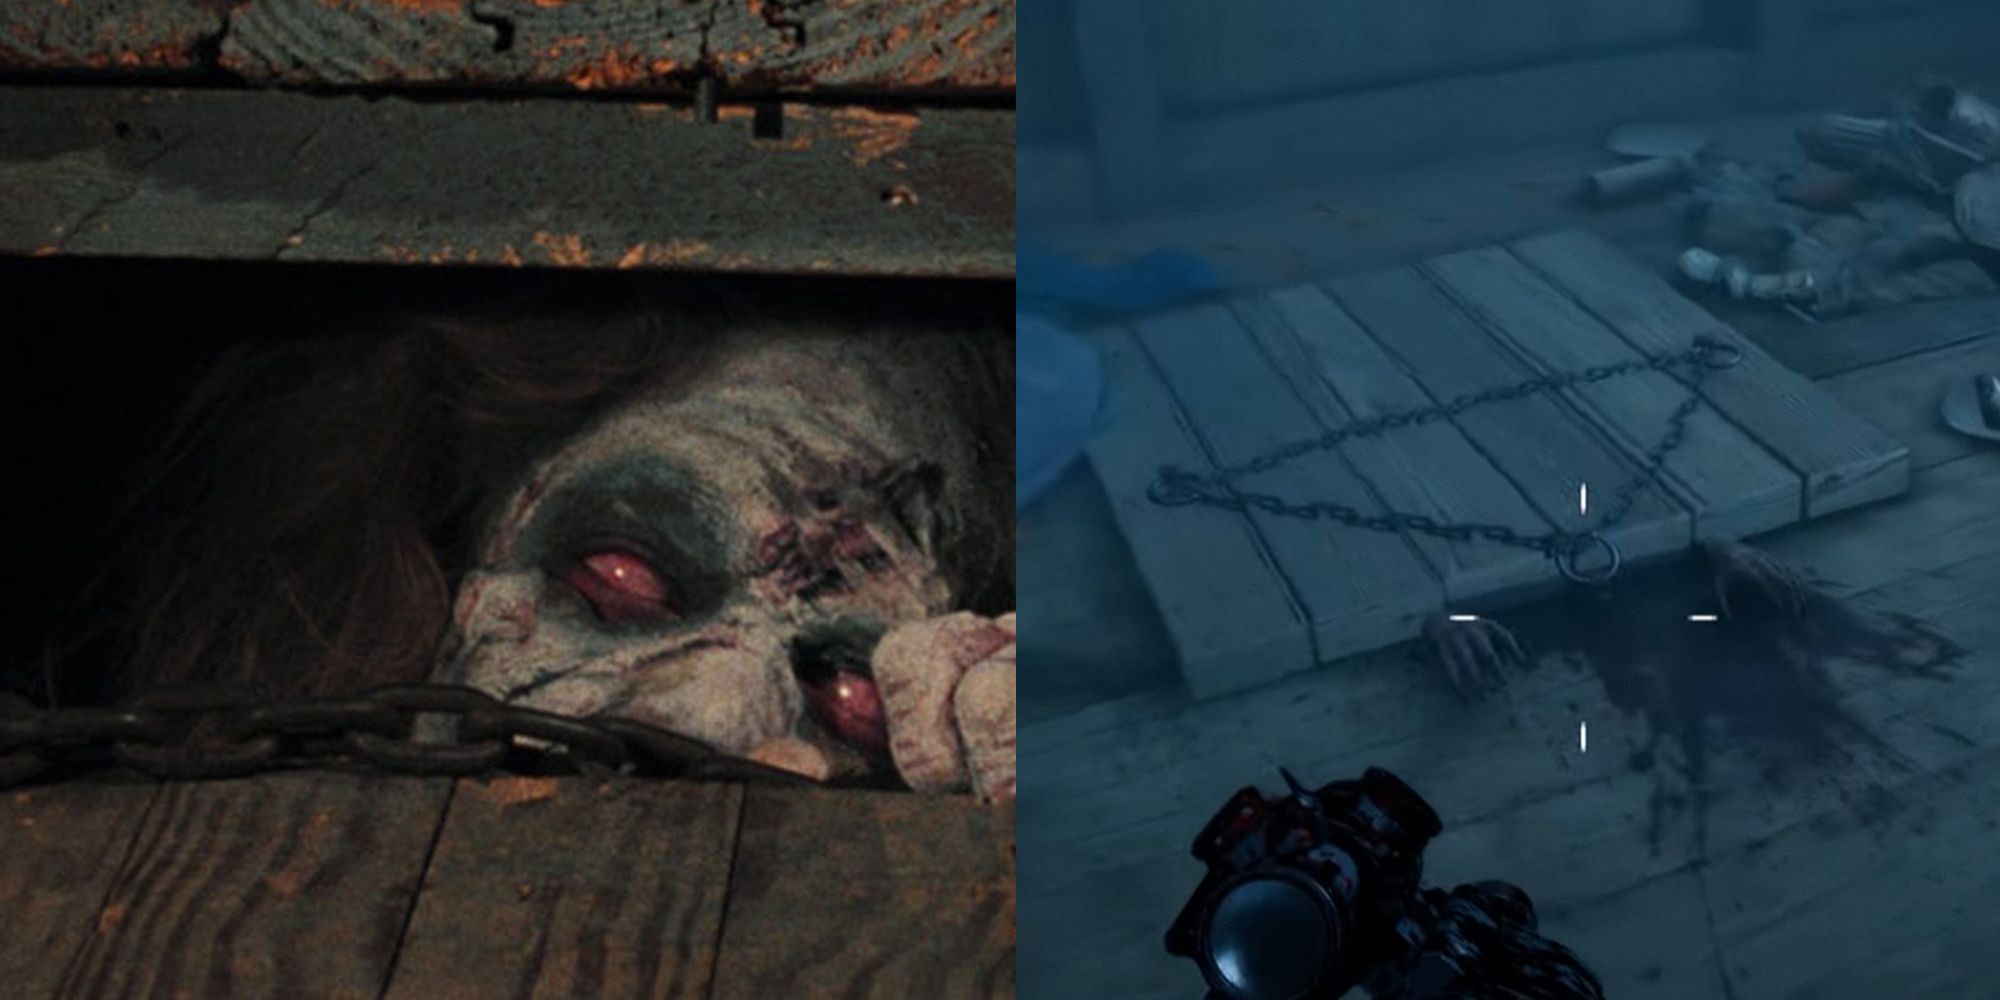 The Evil Dead, Back 4 Blood. Split image. Screenshot of zombie from Evil Dead on the left, hatch from Back 4 Blood on the right.